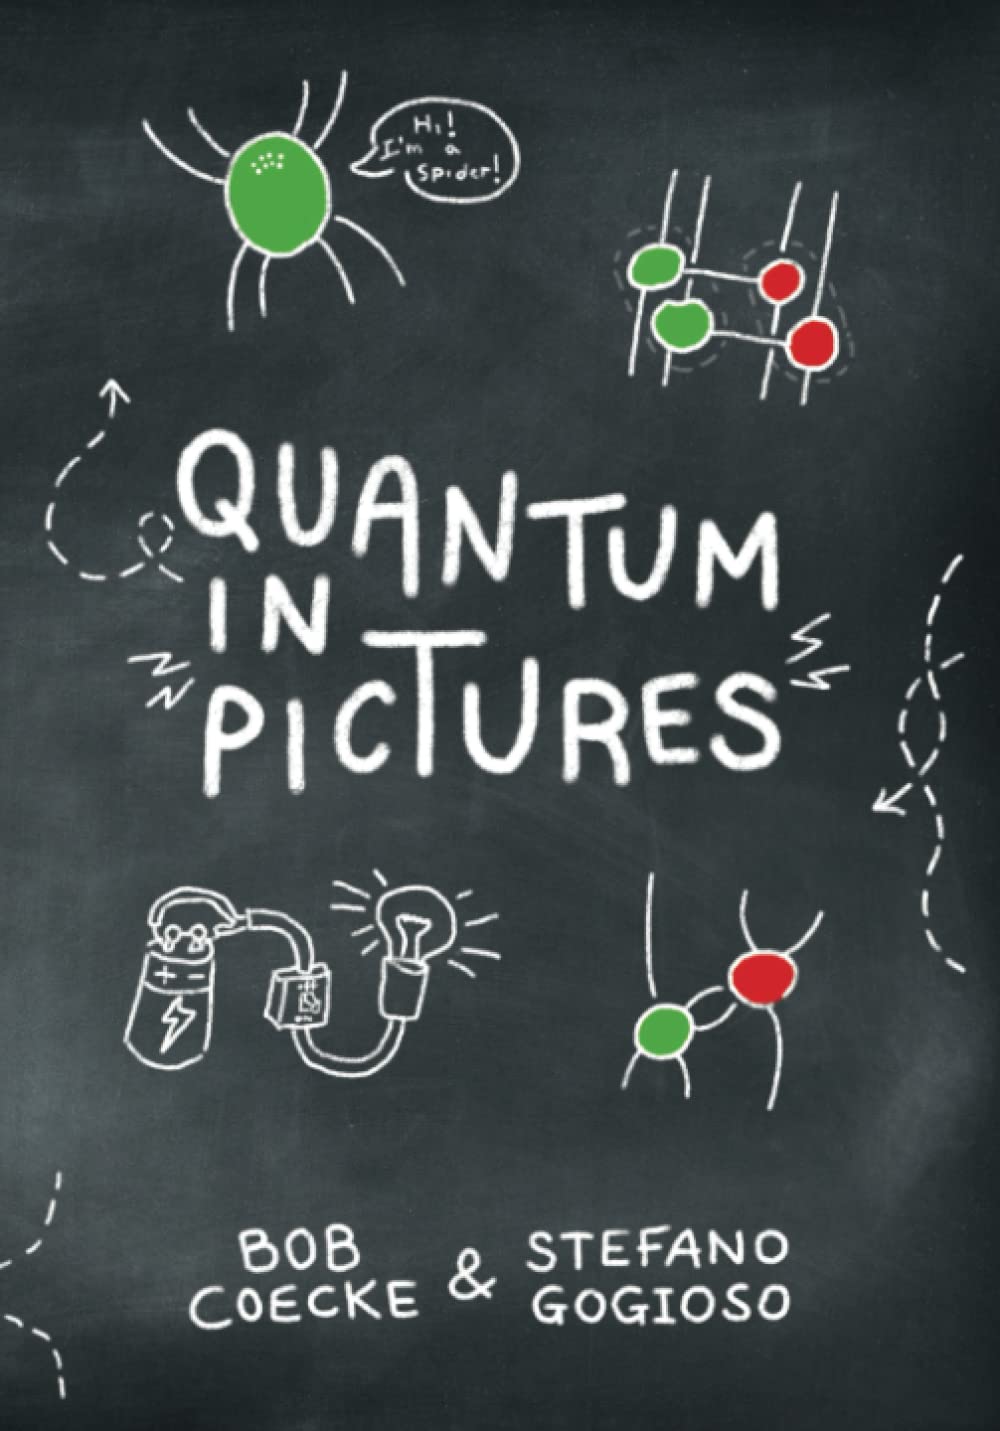 What To Expect In The New Book: “Quantum In Pictures” By Professor Bob Coecke And Dr. Stefano Gogioso